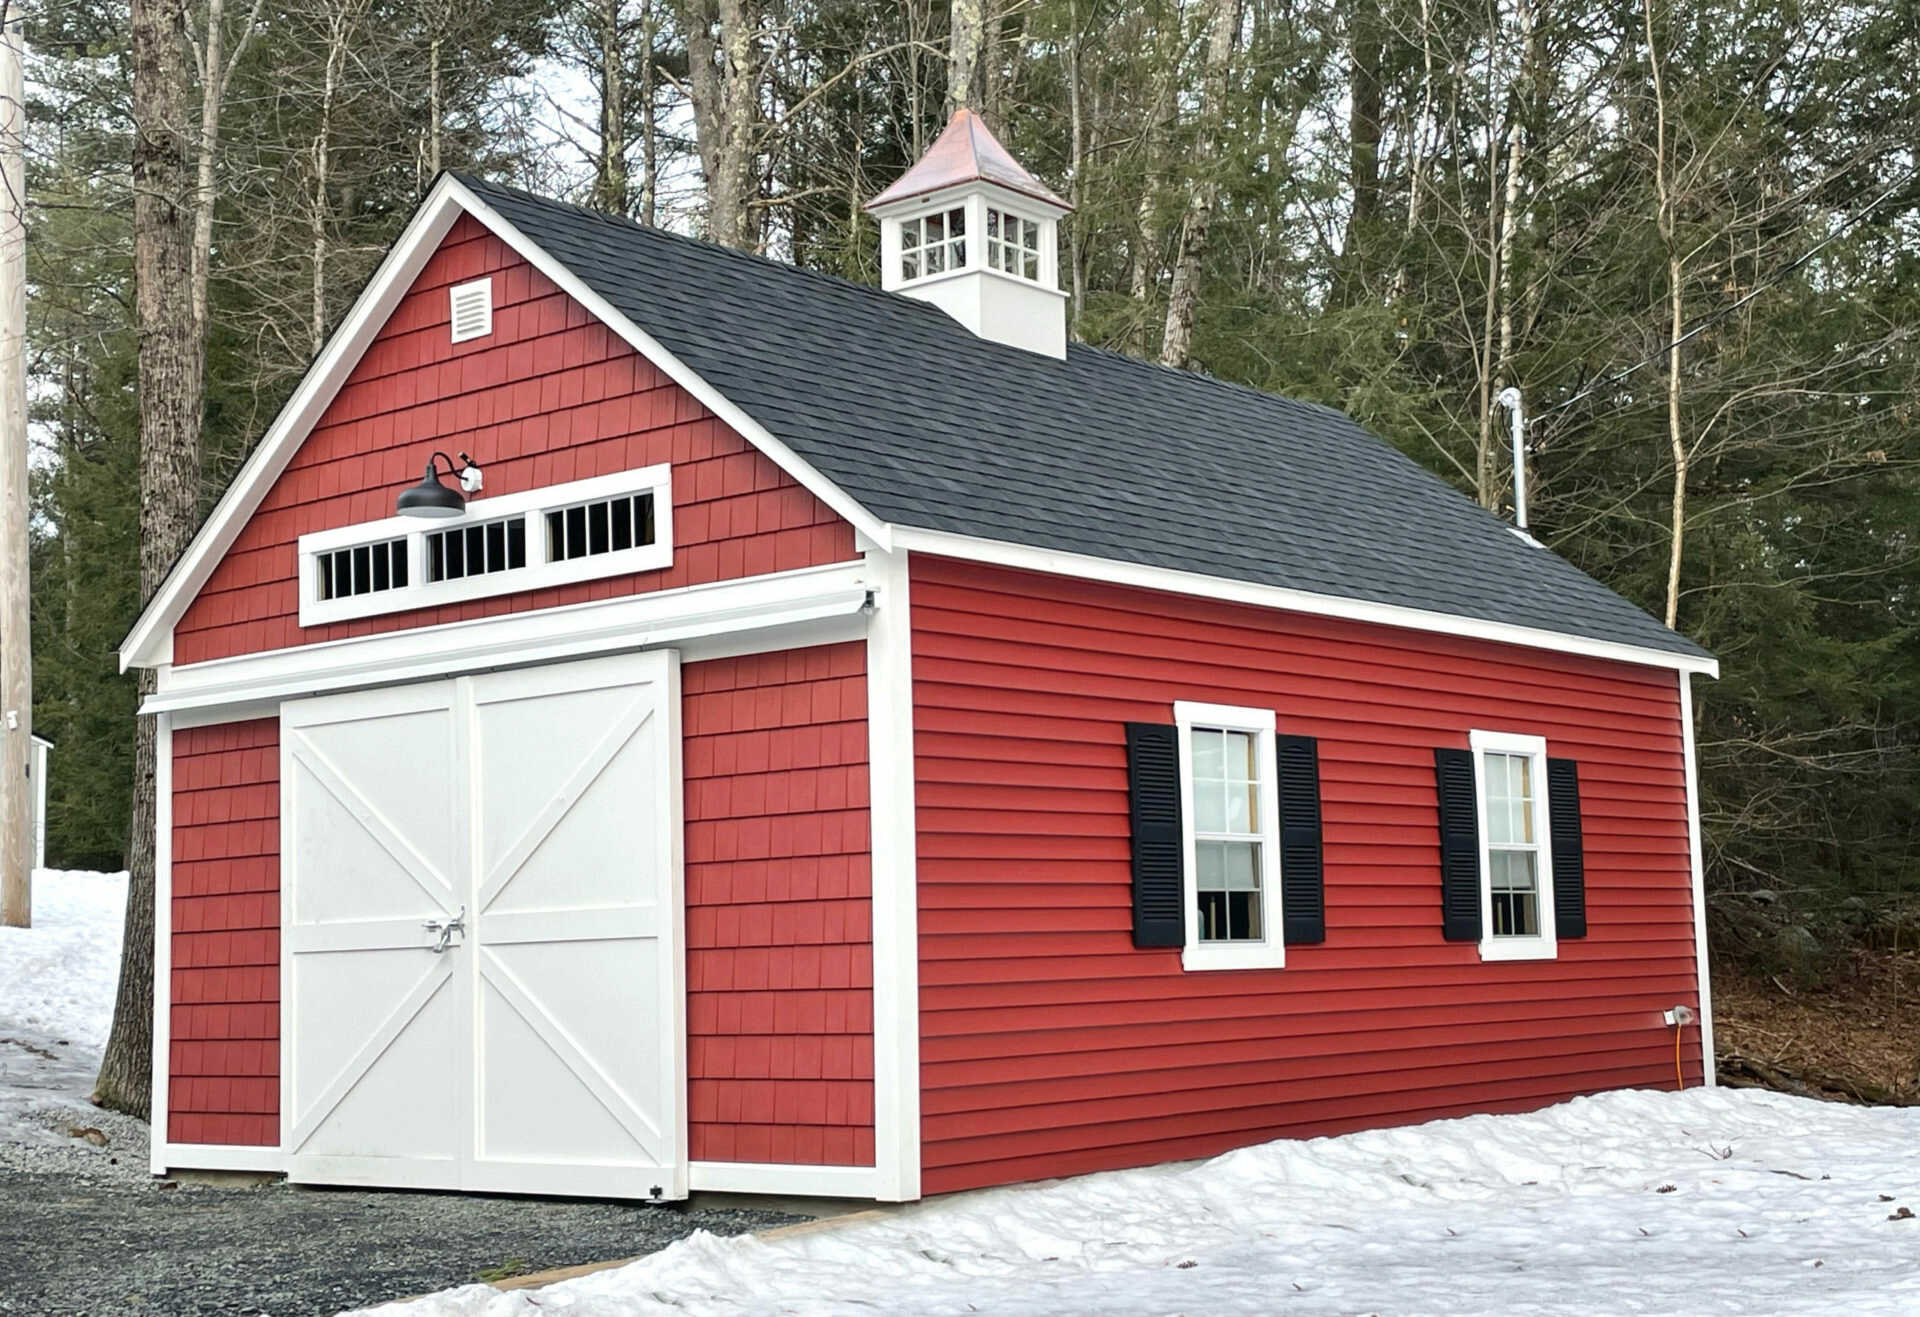 Ideas for Turning Your Shed Into Your Own Winter Getaway